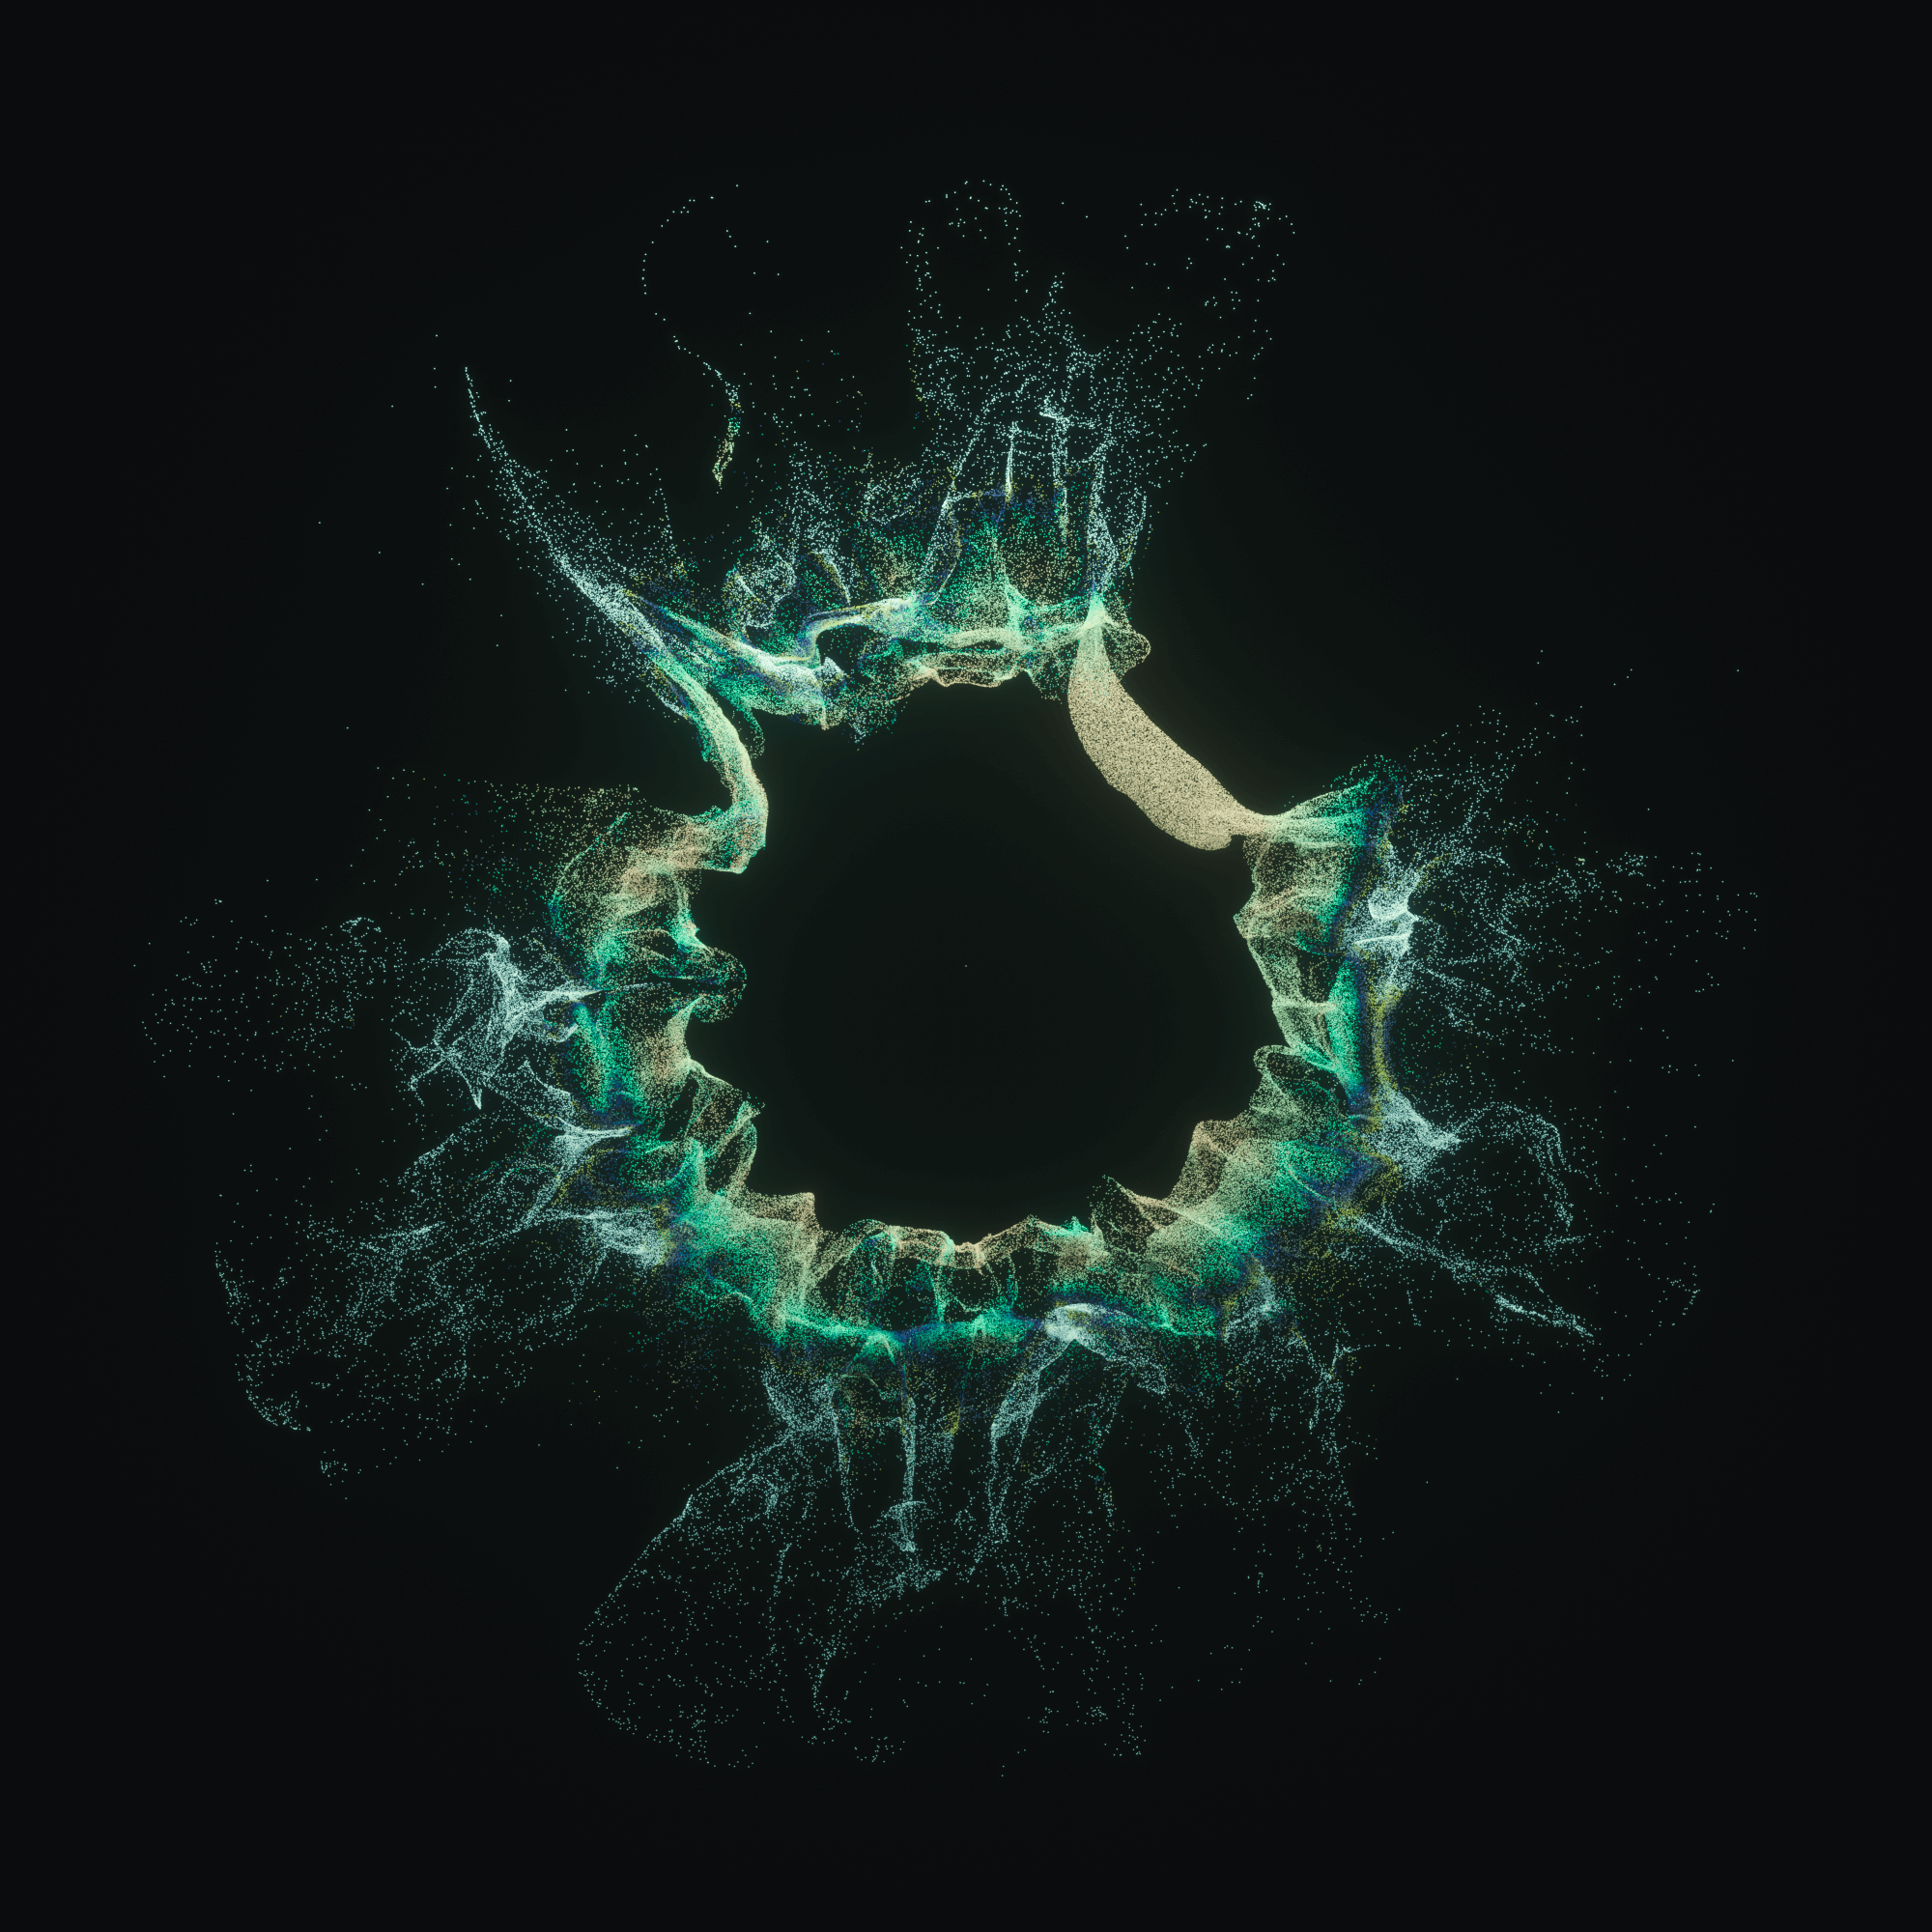 022823_xparticles_advection_master_1